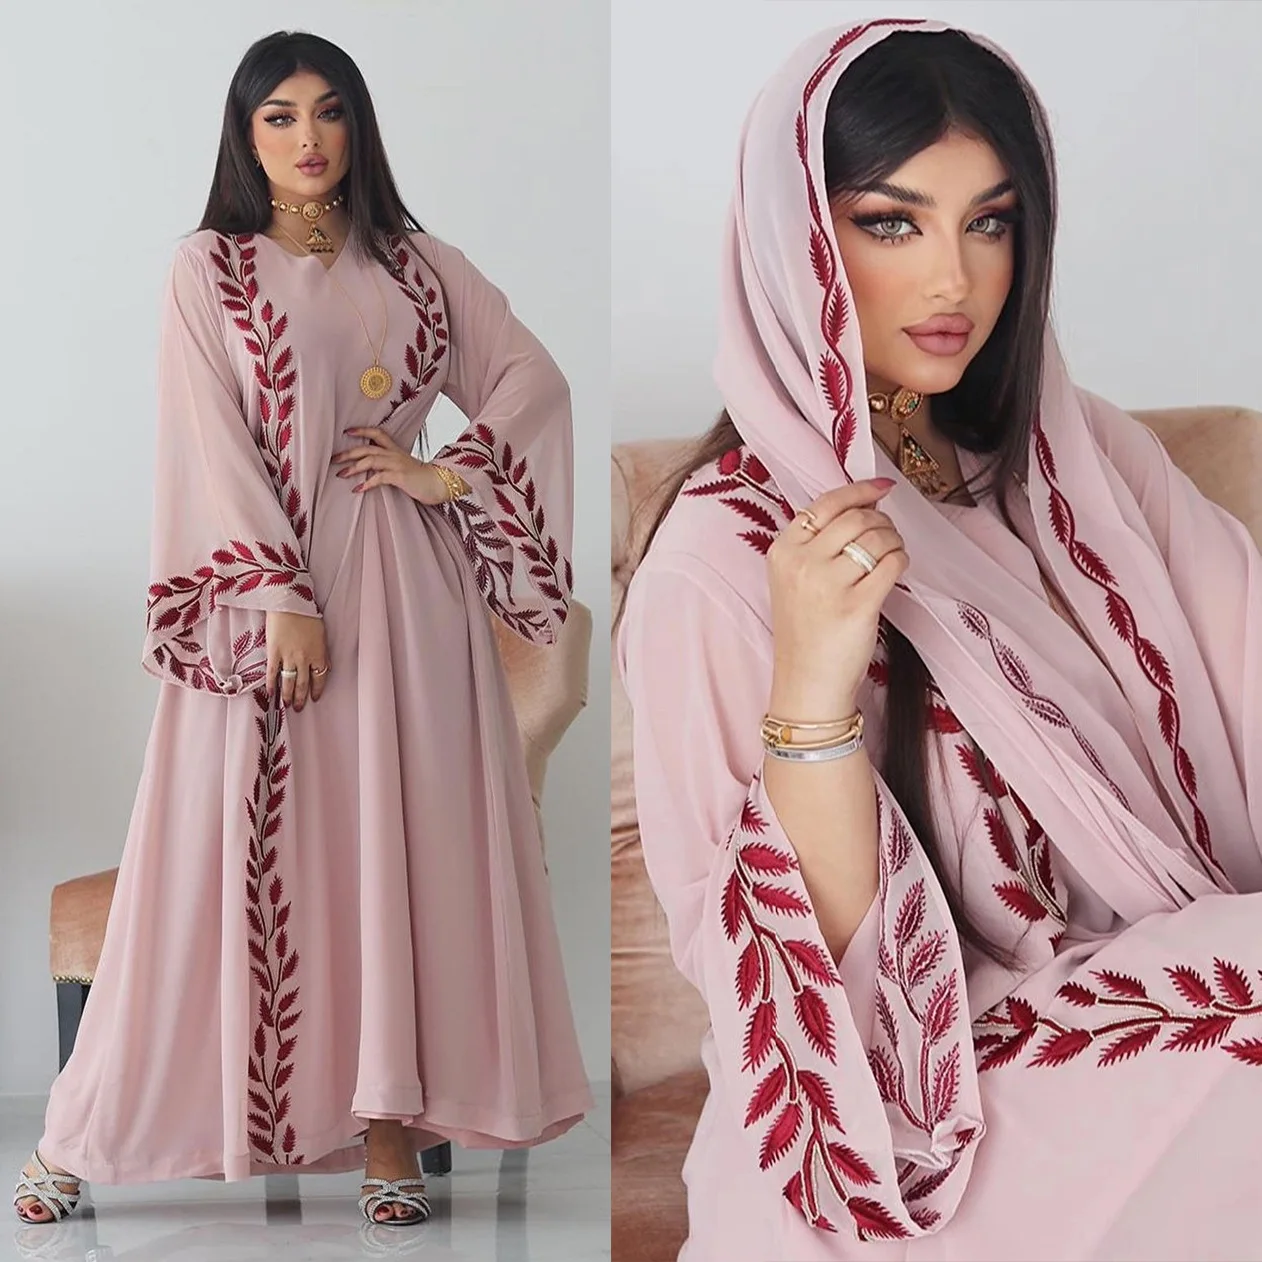 chiffon blouse muslim, chiffon blouse muslim Suppliers and Manufacturers at